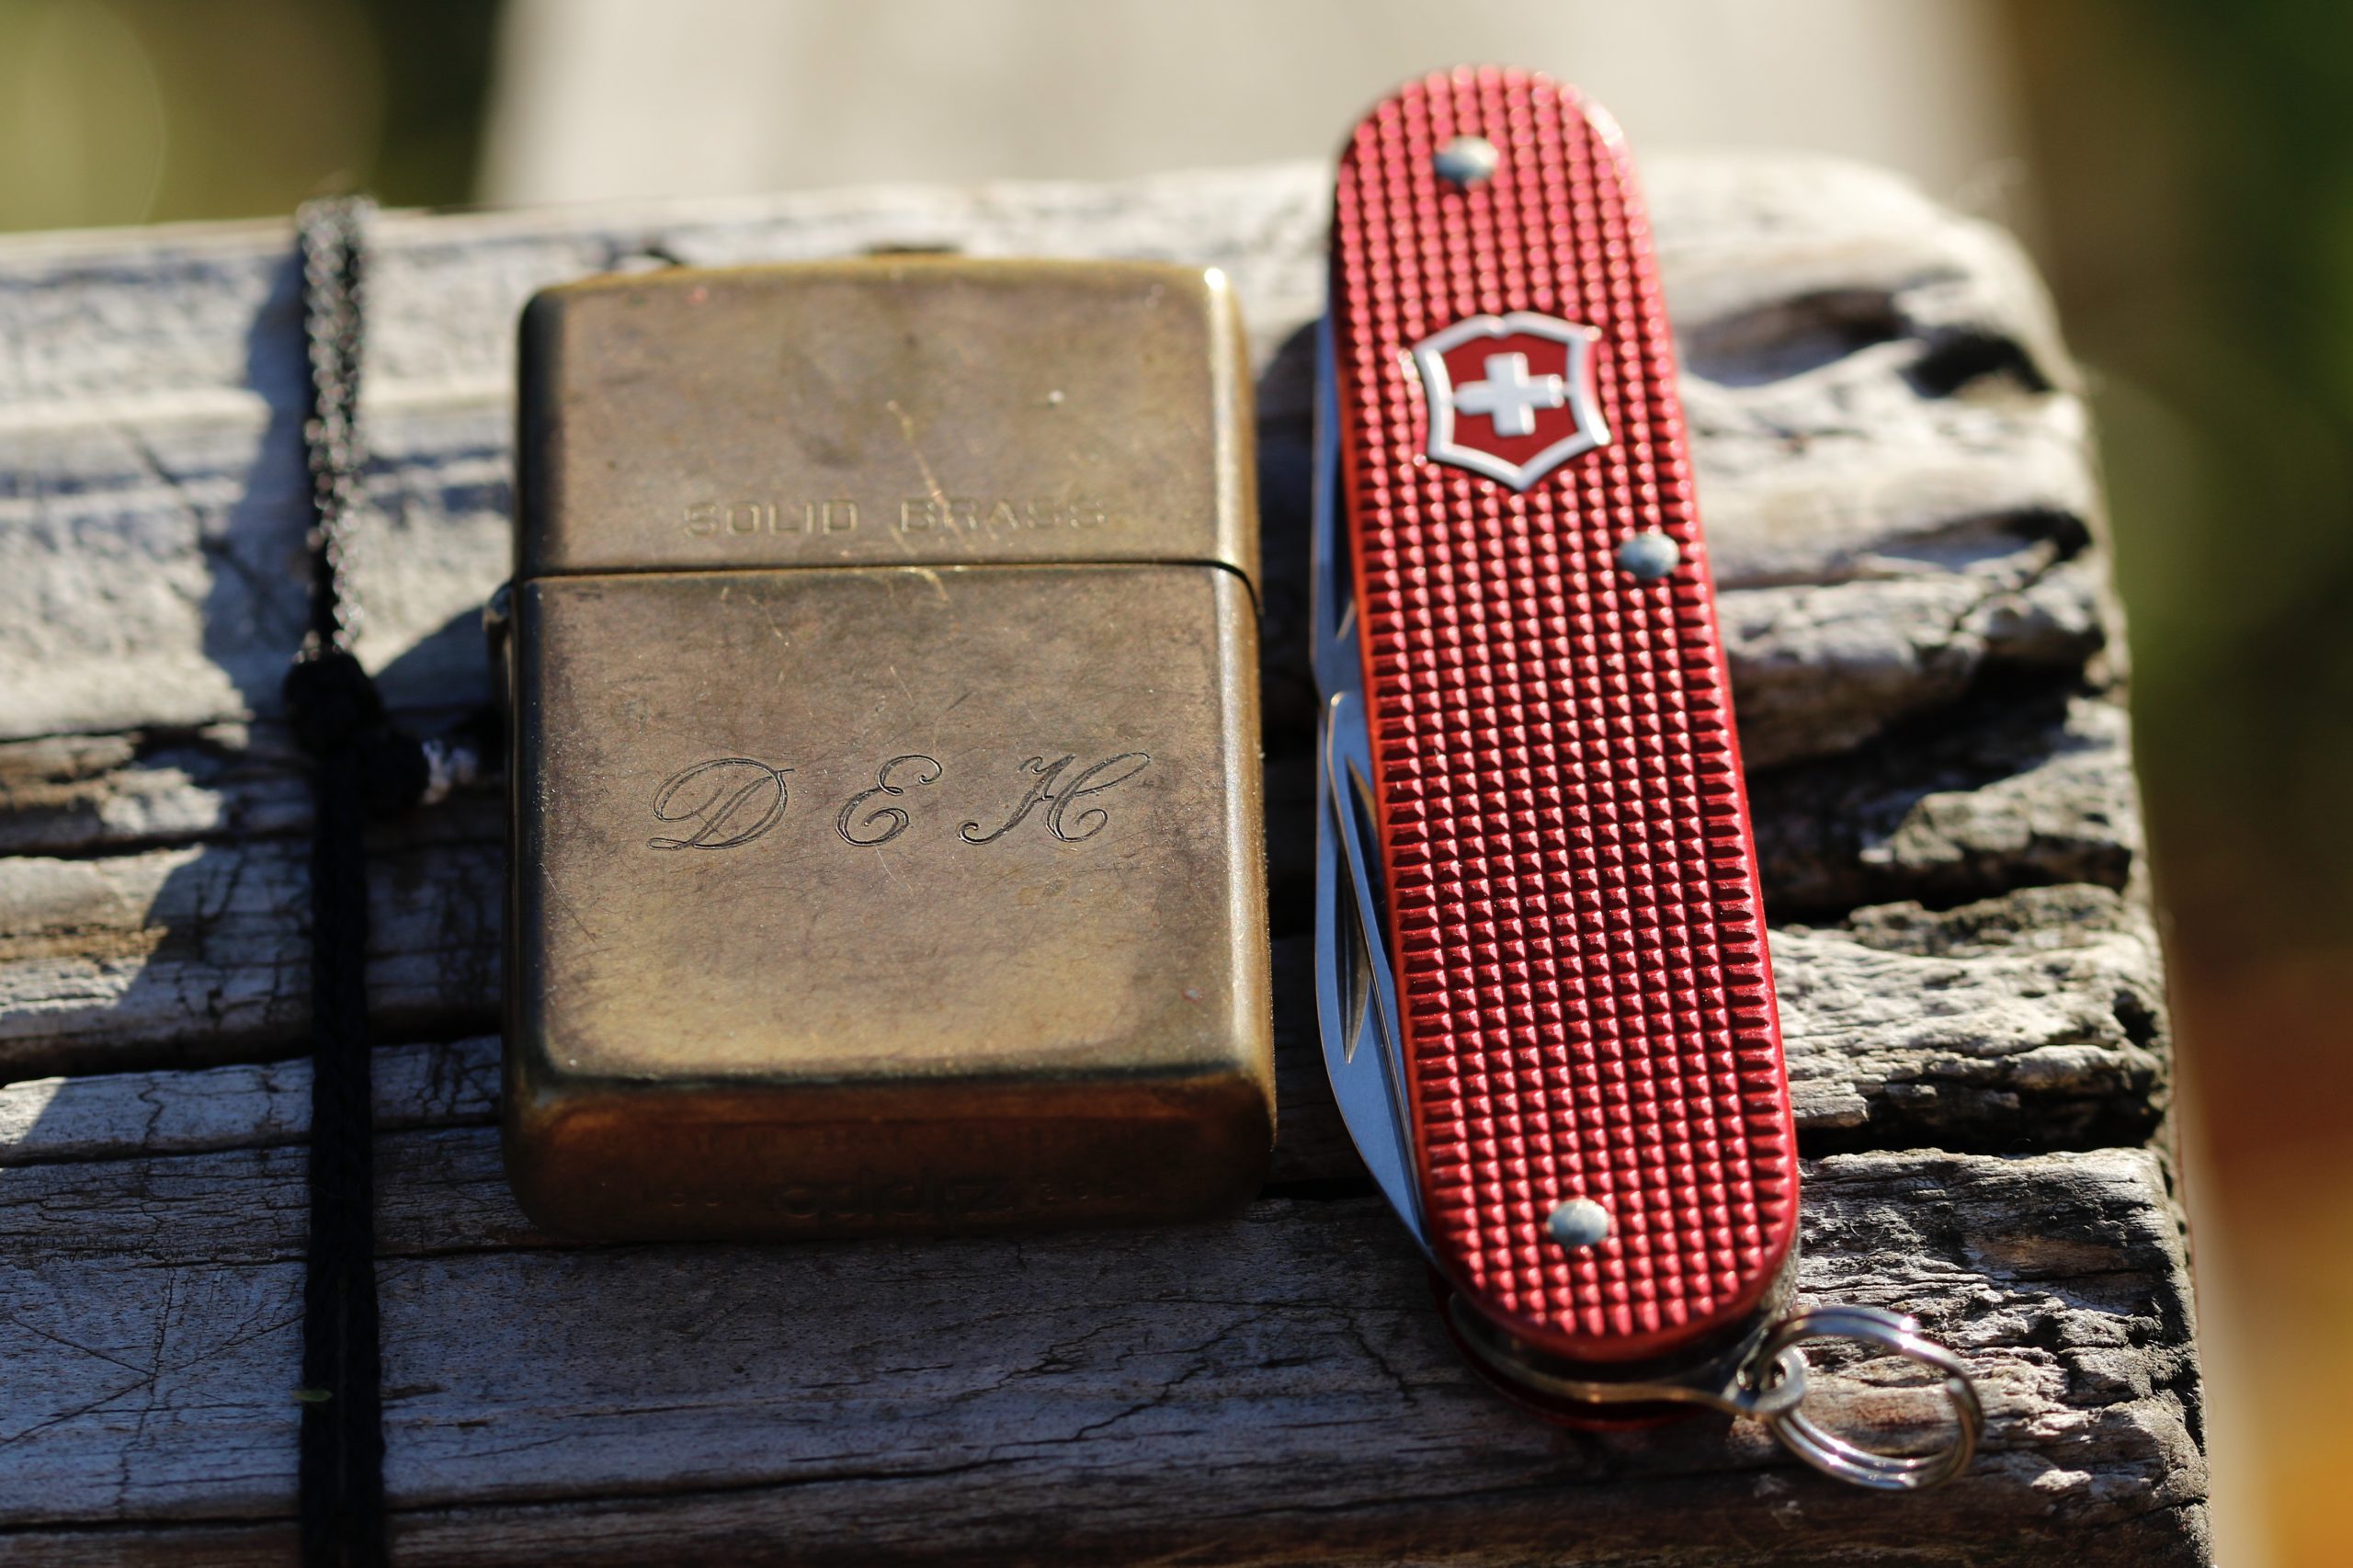 The Victorinox Cadet is thin and light, even with the added weight from the aluminum scales.